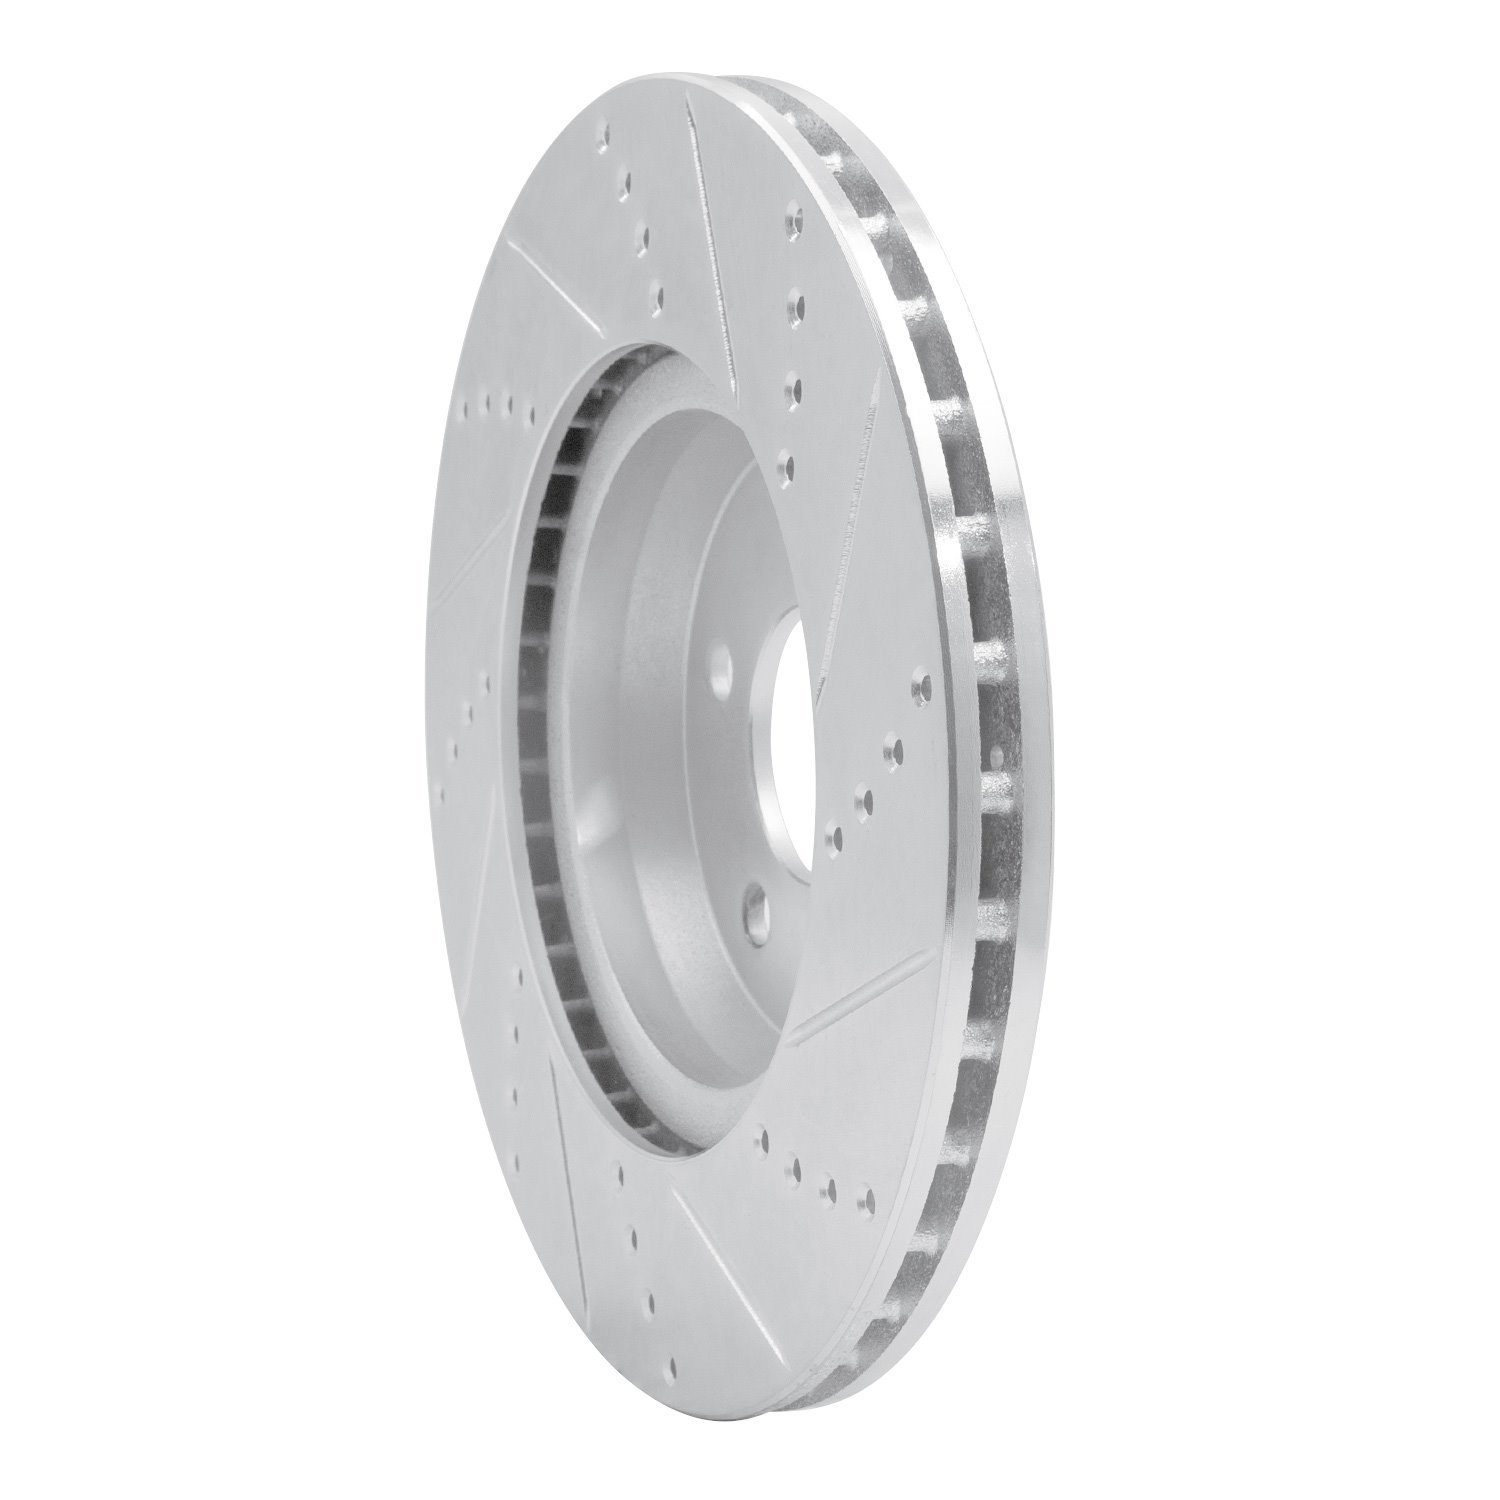 E-Line Drilled & Slotted Silver Brake Rotor, Fits Select Mercedes-Benz, Position: Rear Left